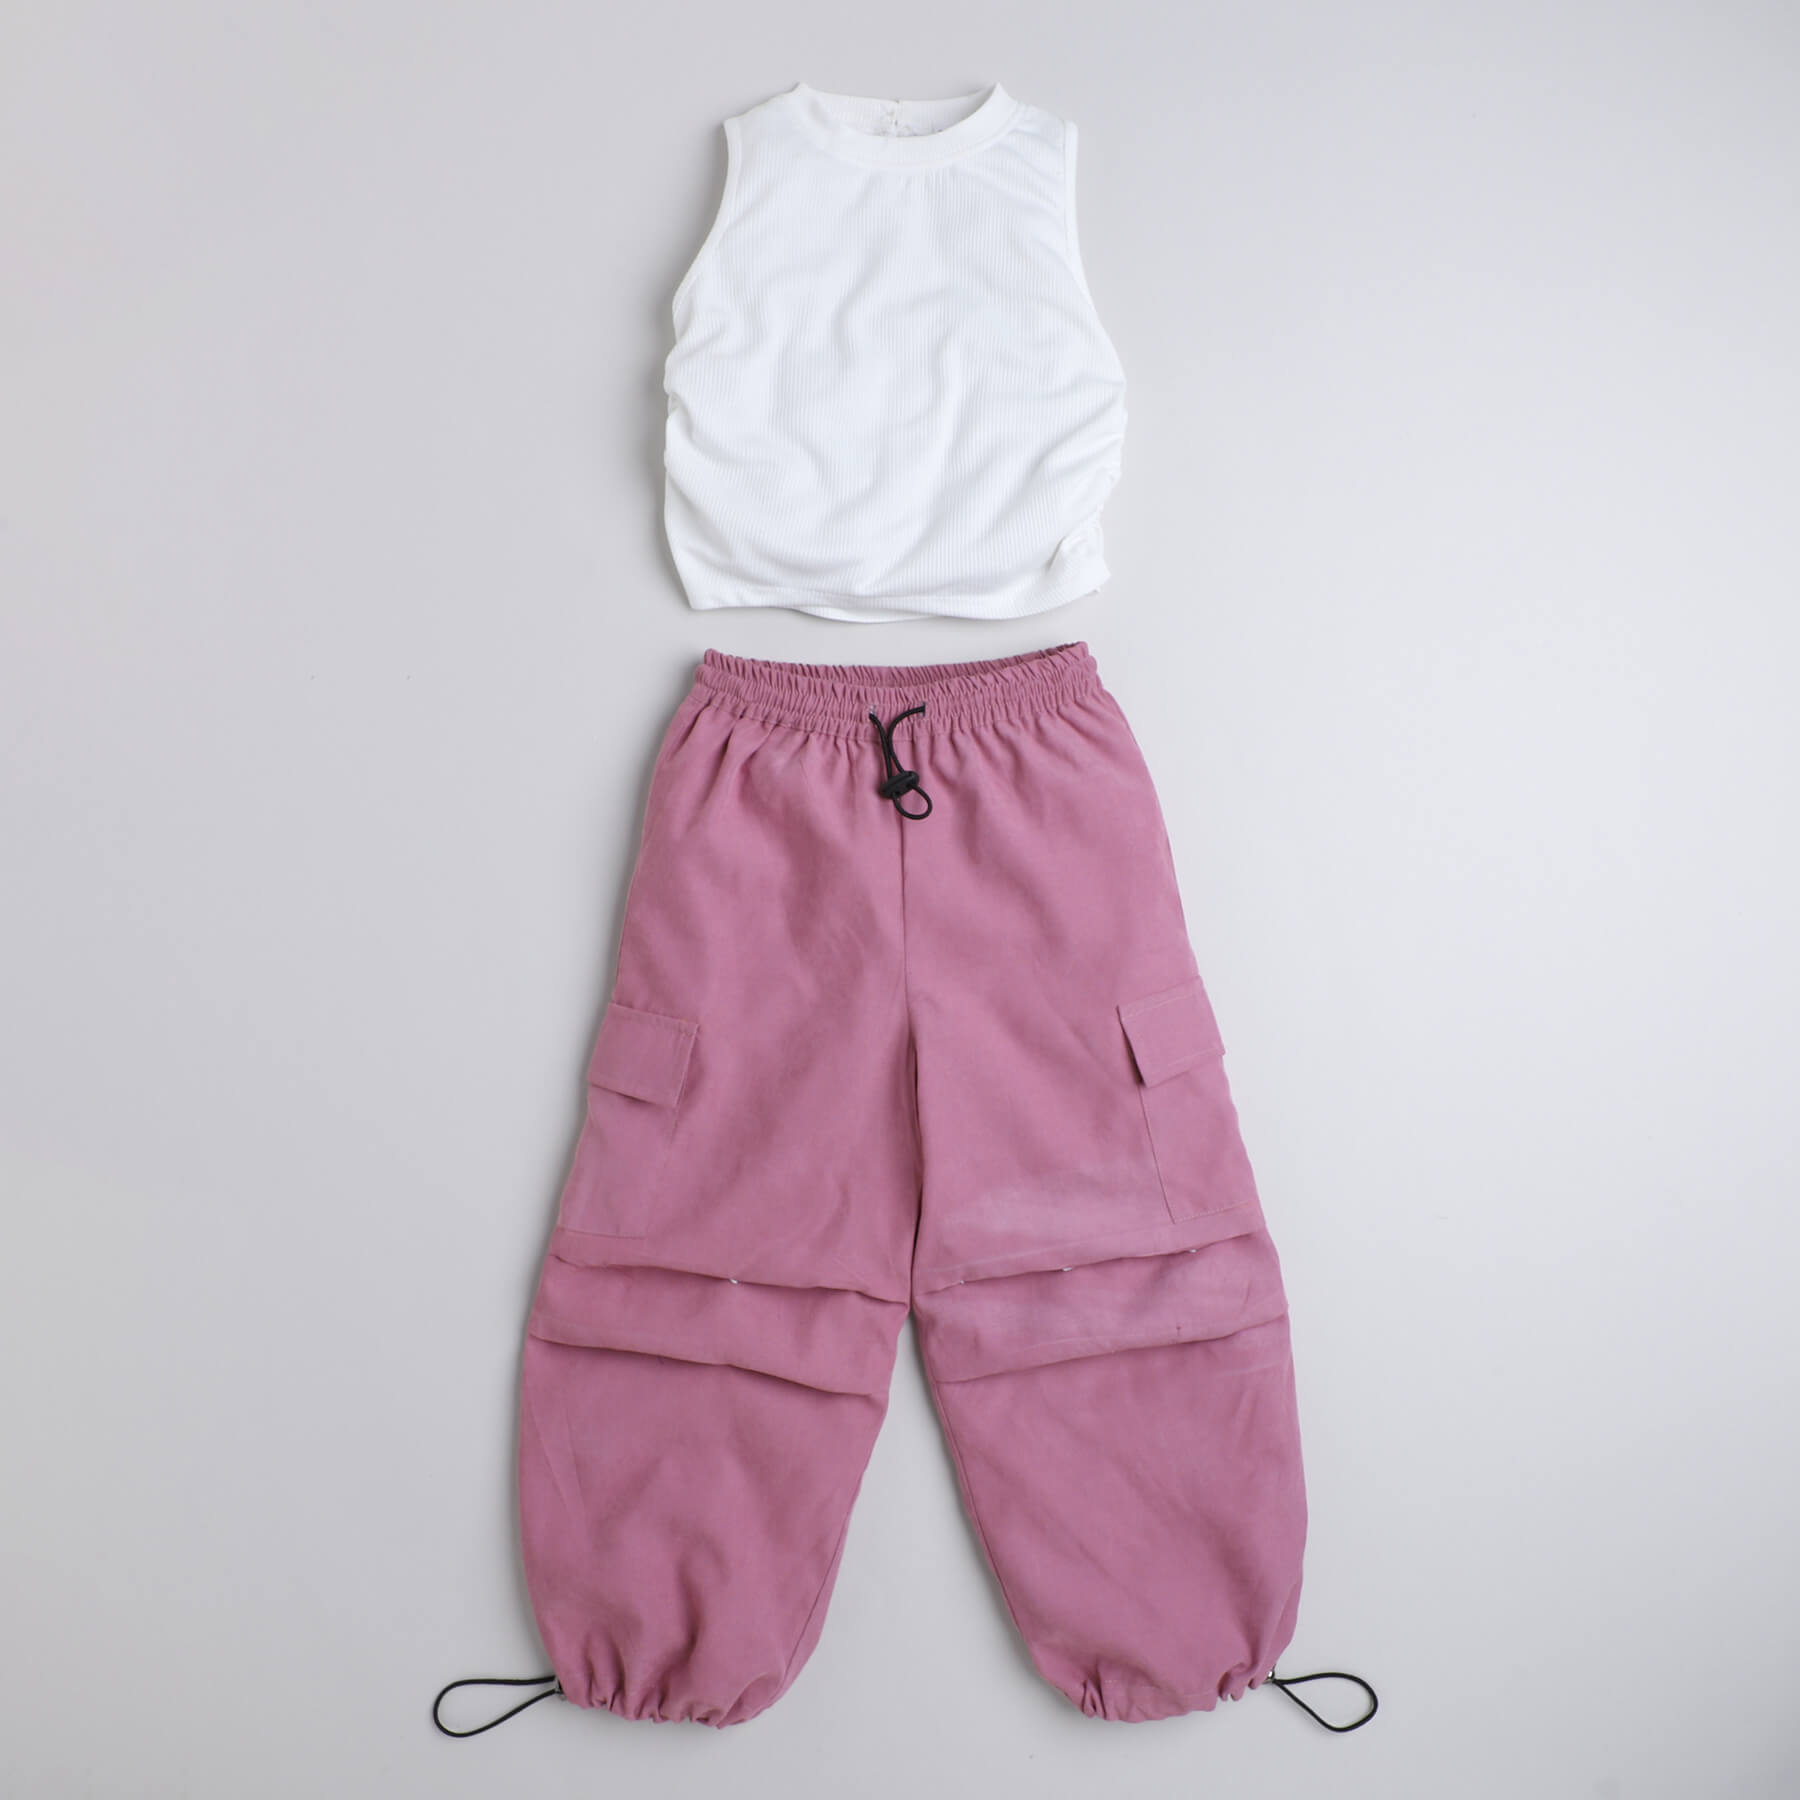 Taffykids sleeveless ruched crop top and parachute pant set-White/Pink